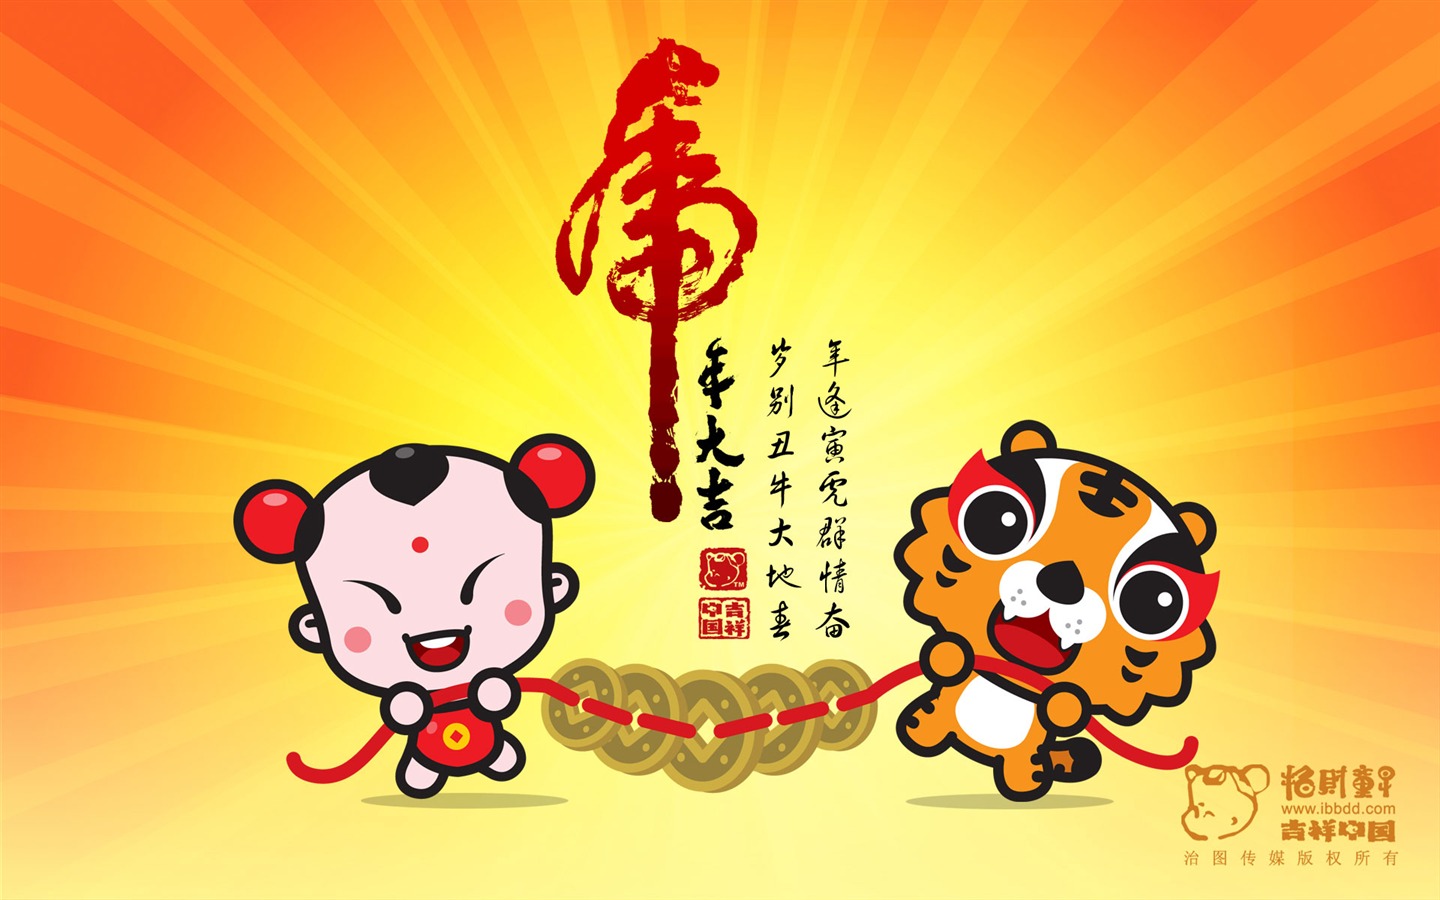 Lucky Boy Year of the Tiger Wallpaper #19 - 1440x900